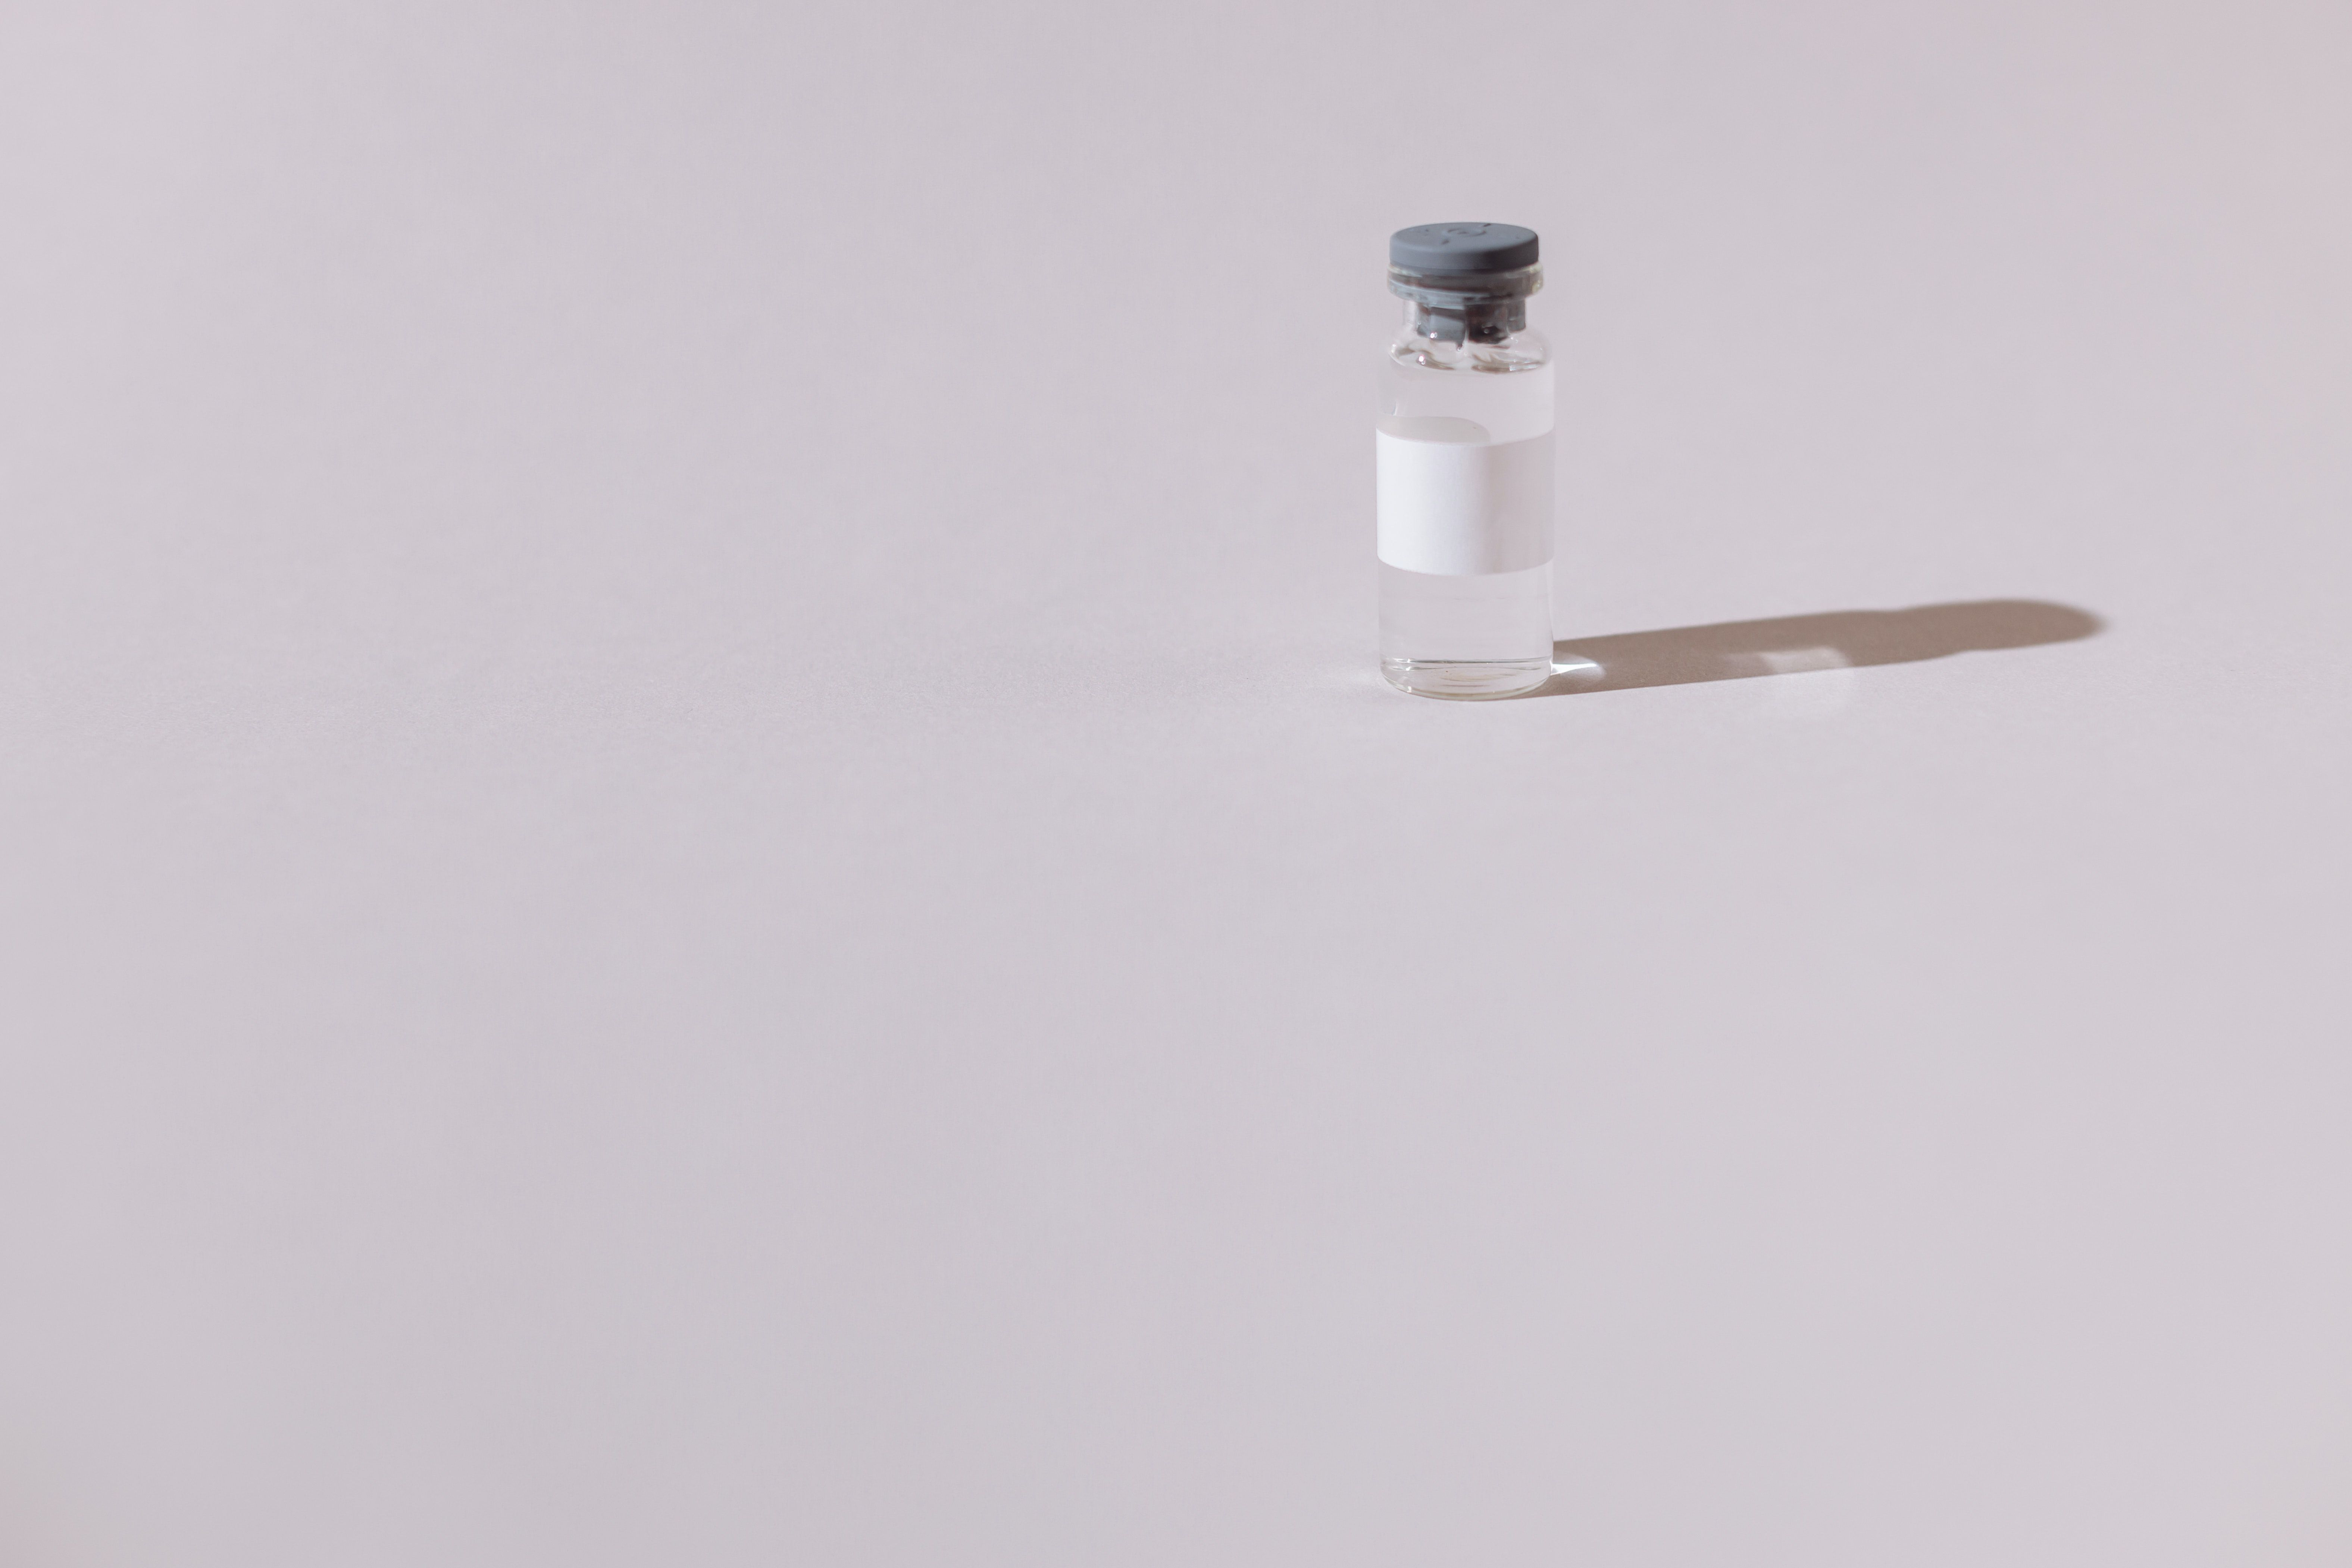 Glass vial with shadow against a gray background